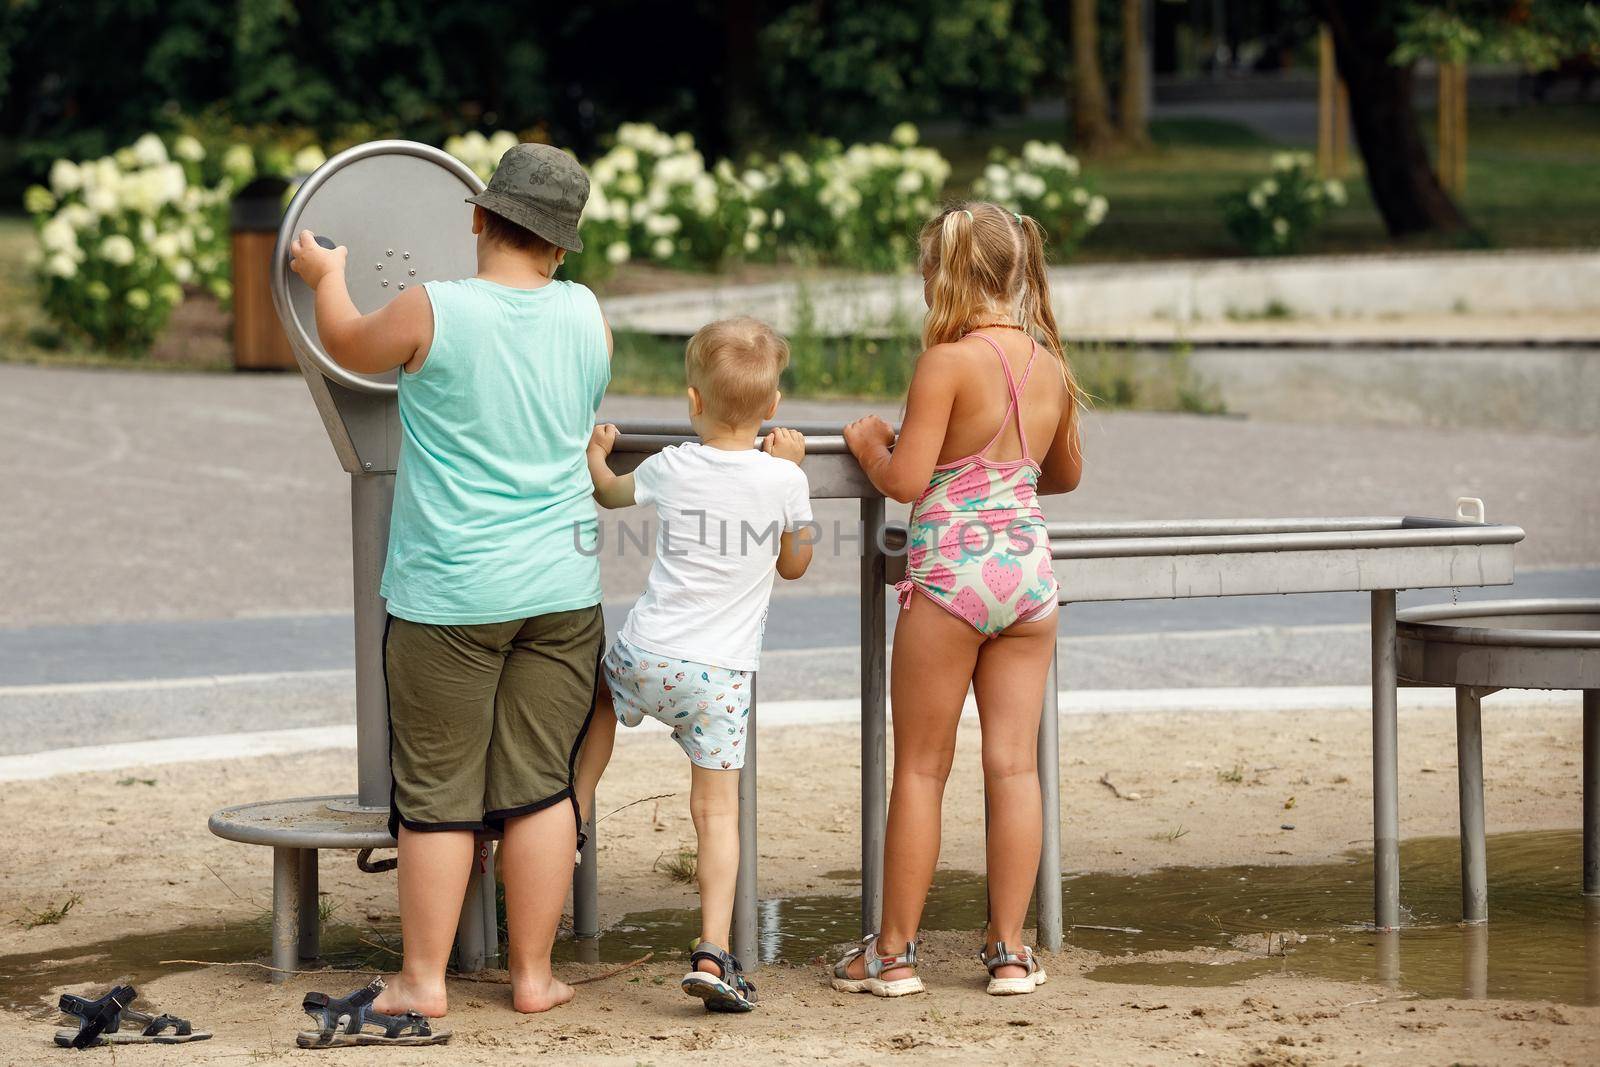 Little boy wearing shorts and white t-shirt playing with water from public faucet, his friends big boy and girl pumping by Lincikas